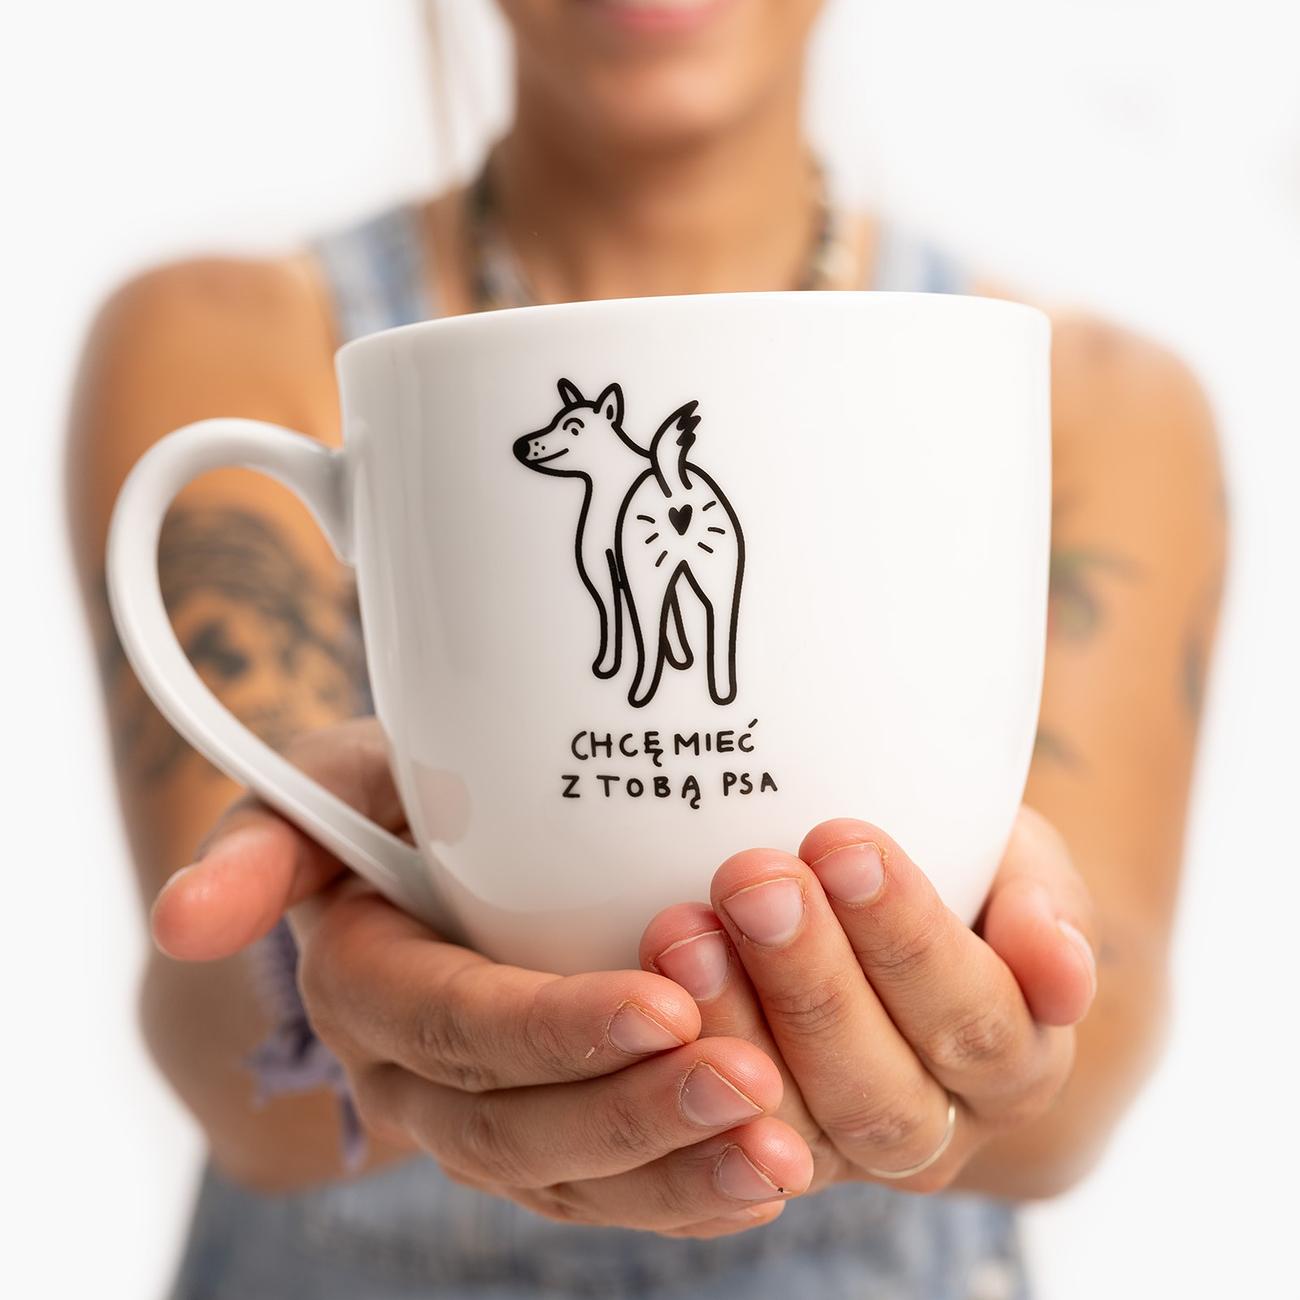 Mug" I want to have a dog with you"